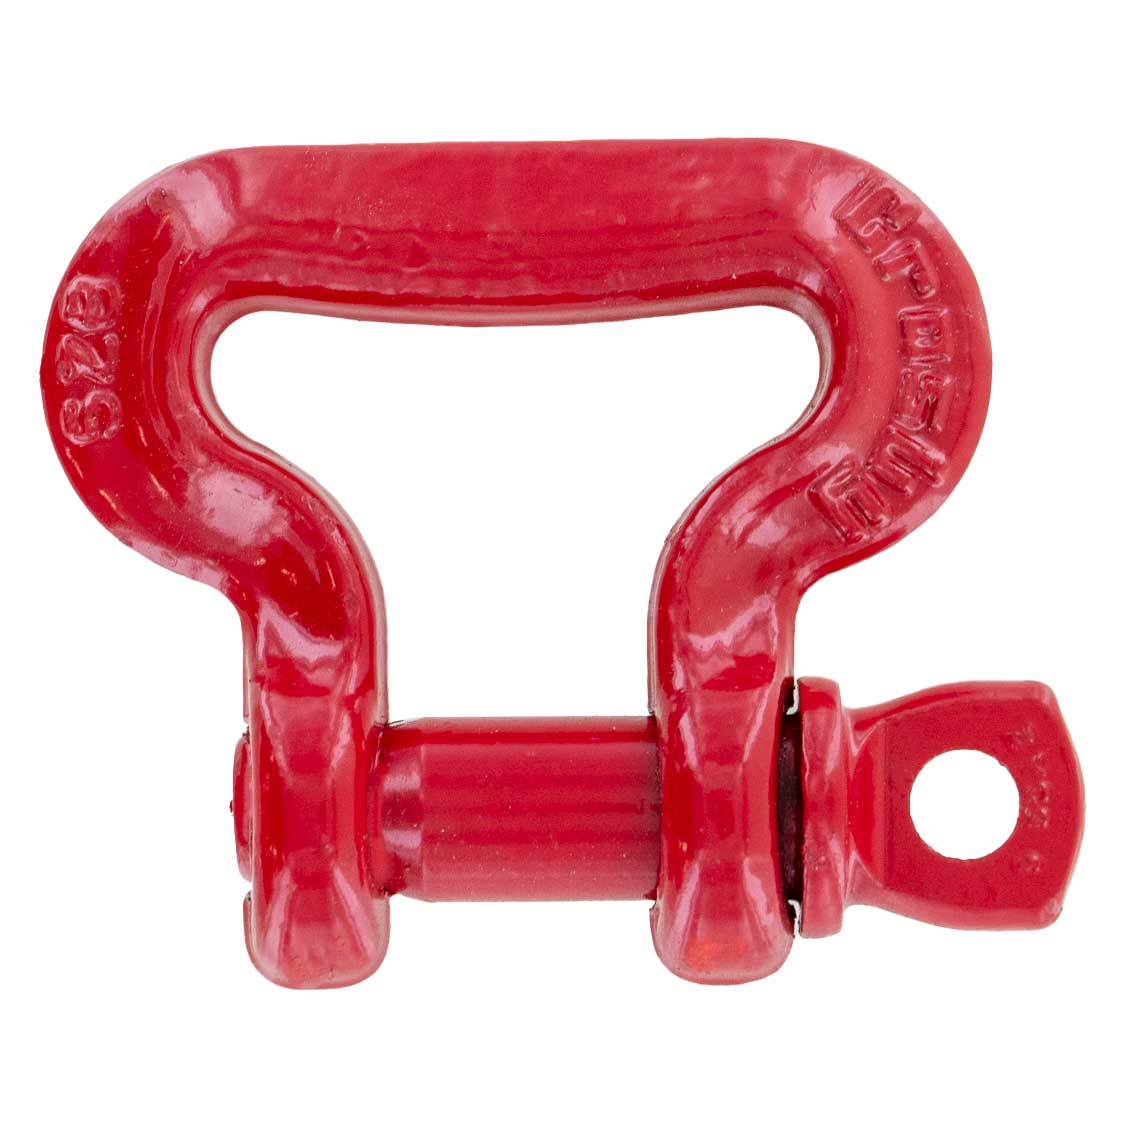 Crosby® Screw Pin Sling Saver Shackle | S-281 - 8.5 Ton primary image